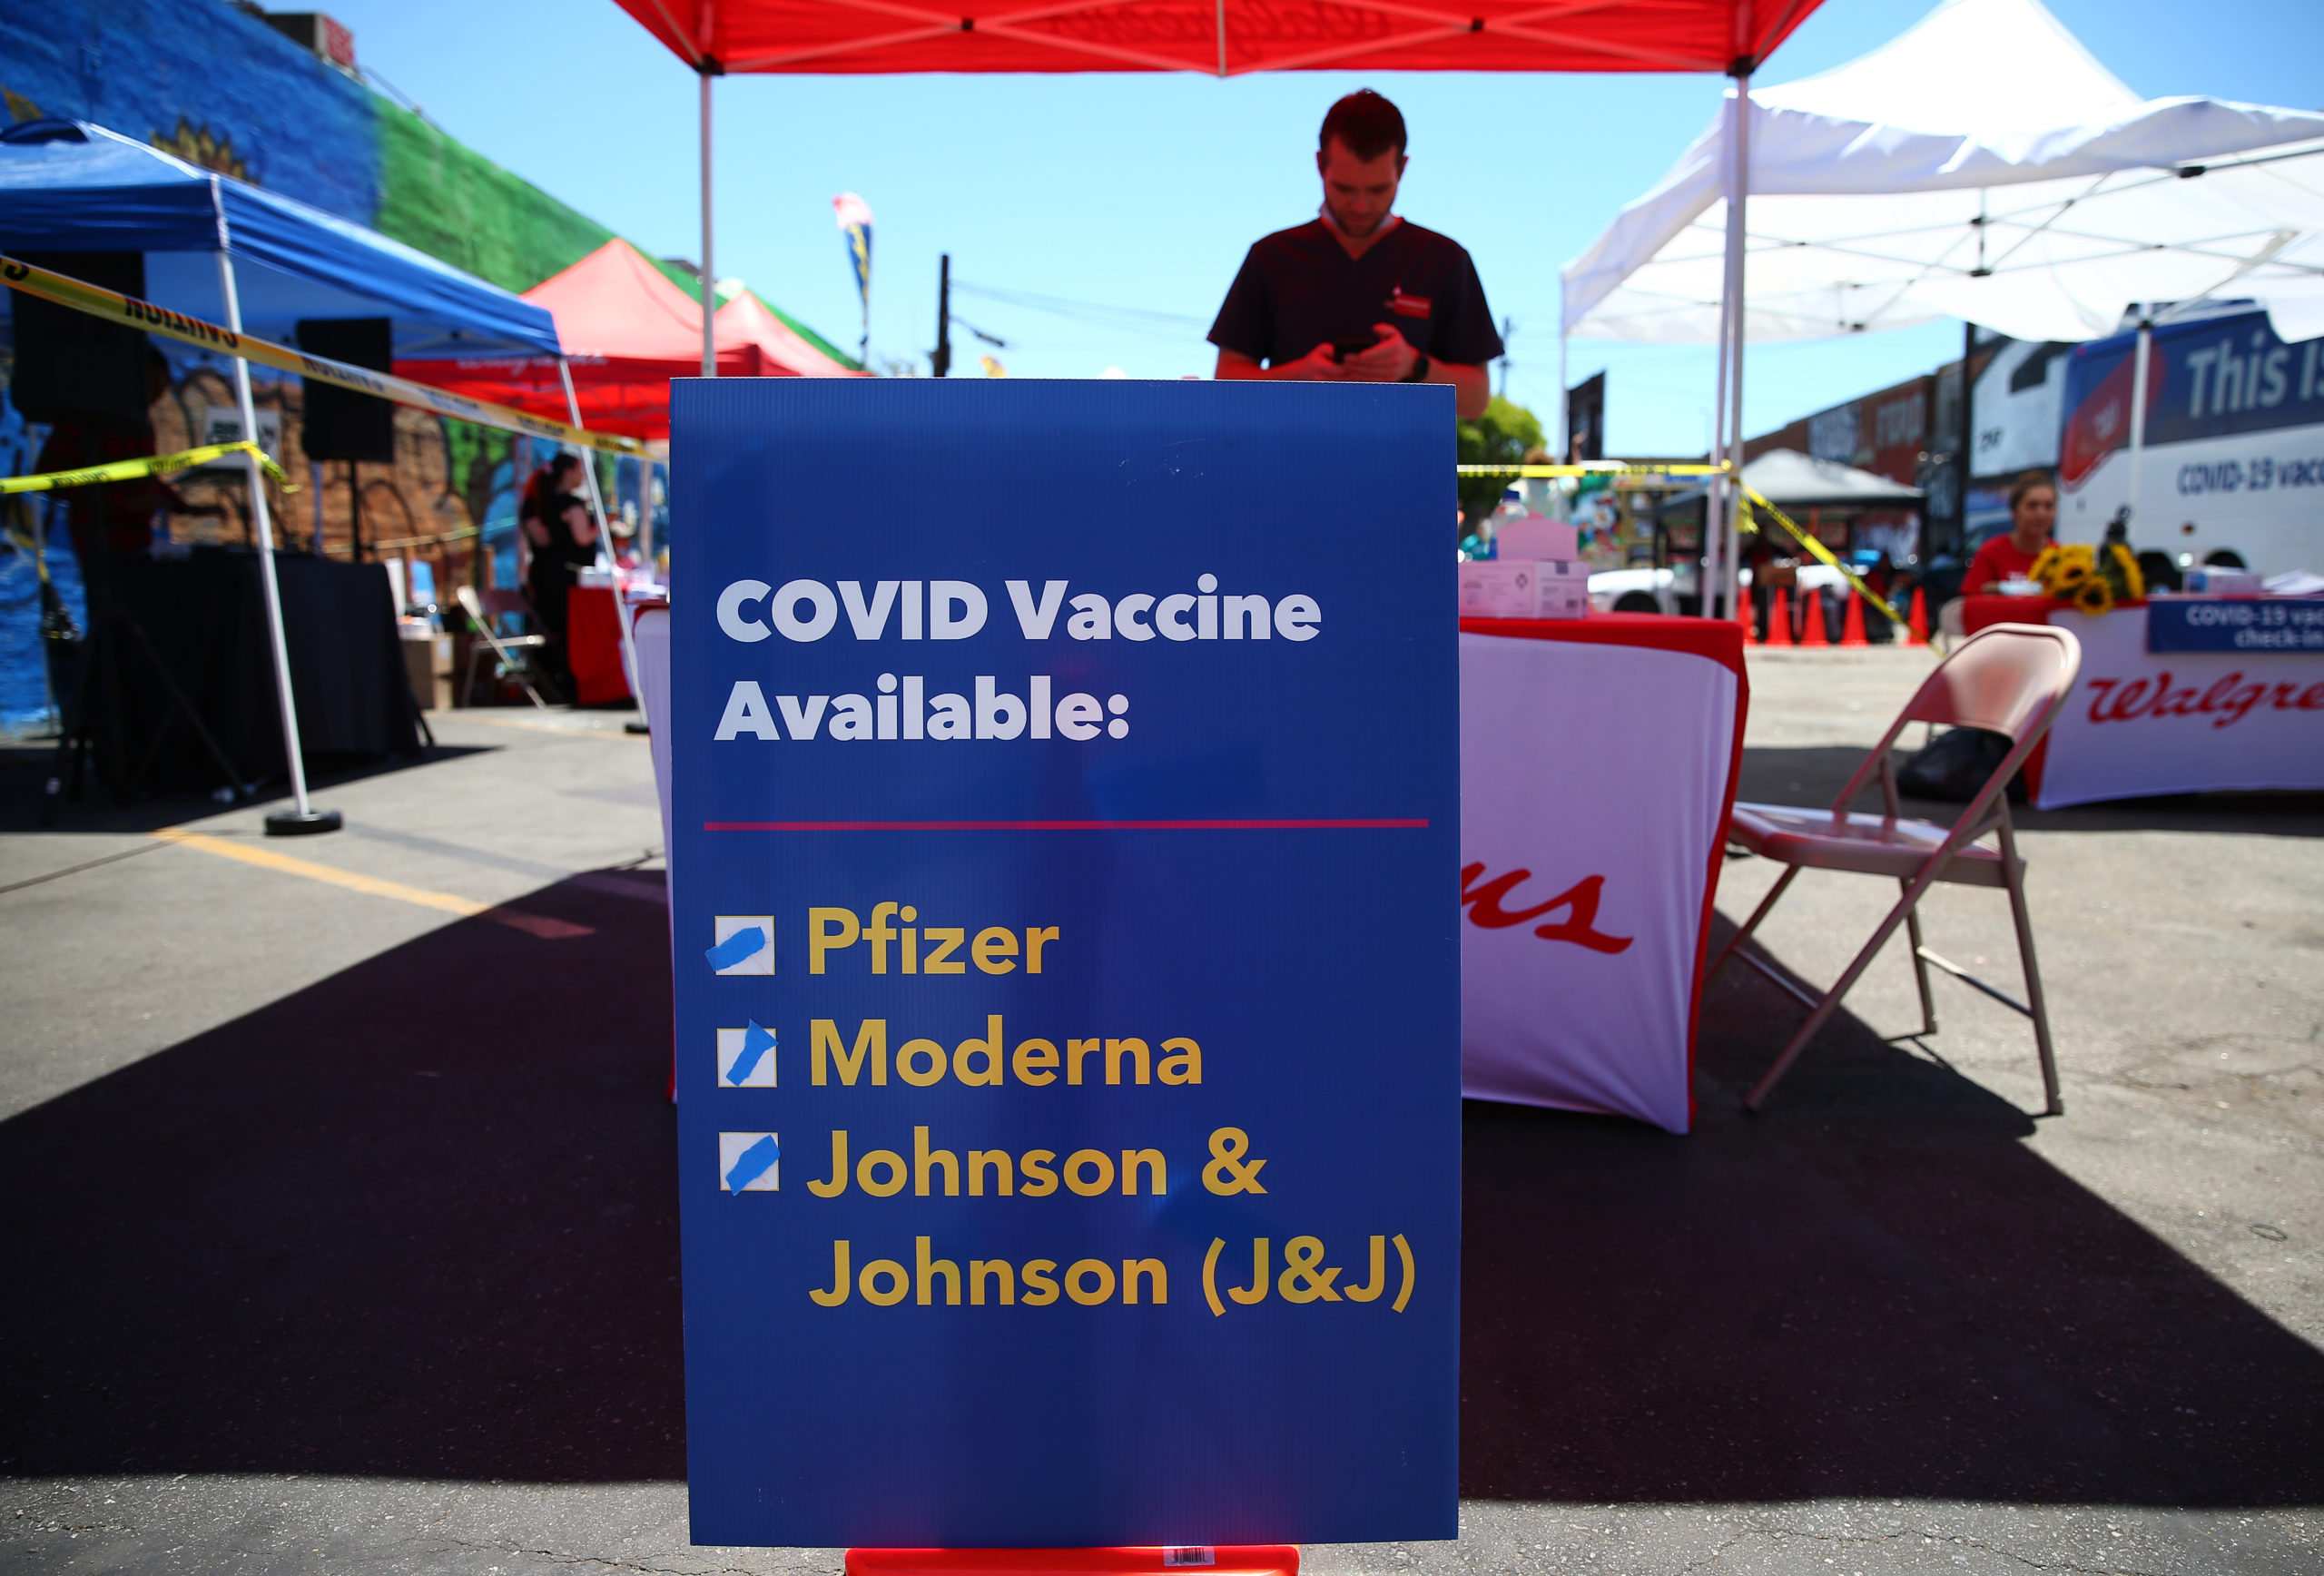 A sign displays the types of coronavirus vaccination doses available at a mobile clinic on June 25 in Los Angeles, California. (Mario Tama/Getty Images)